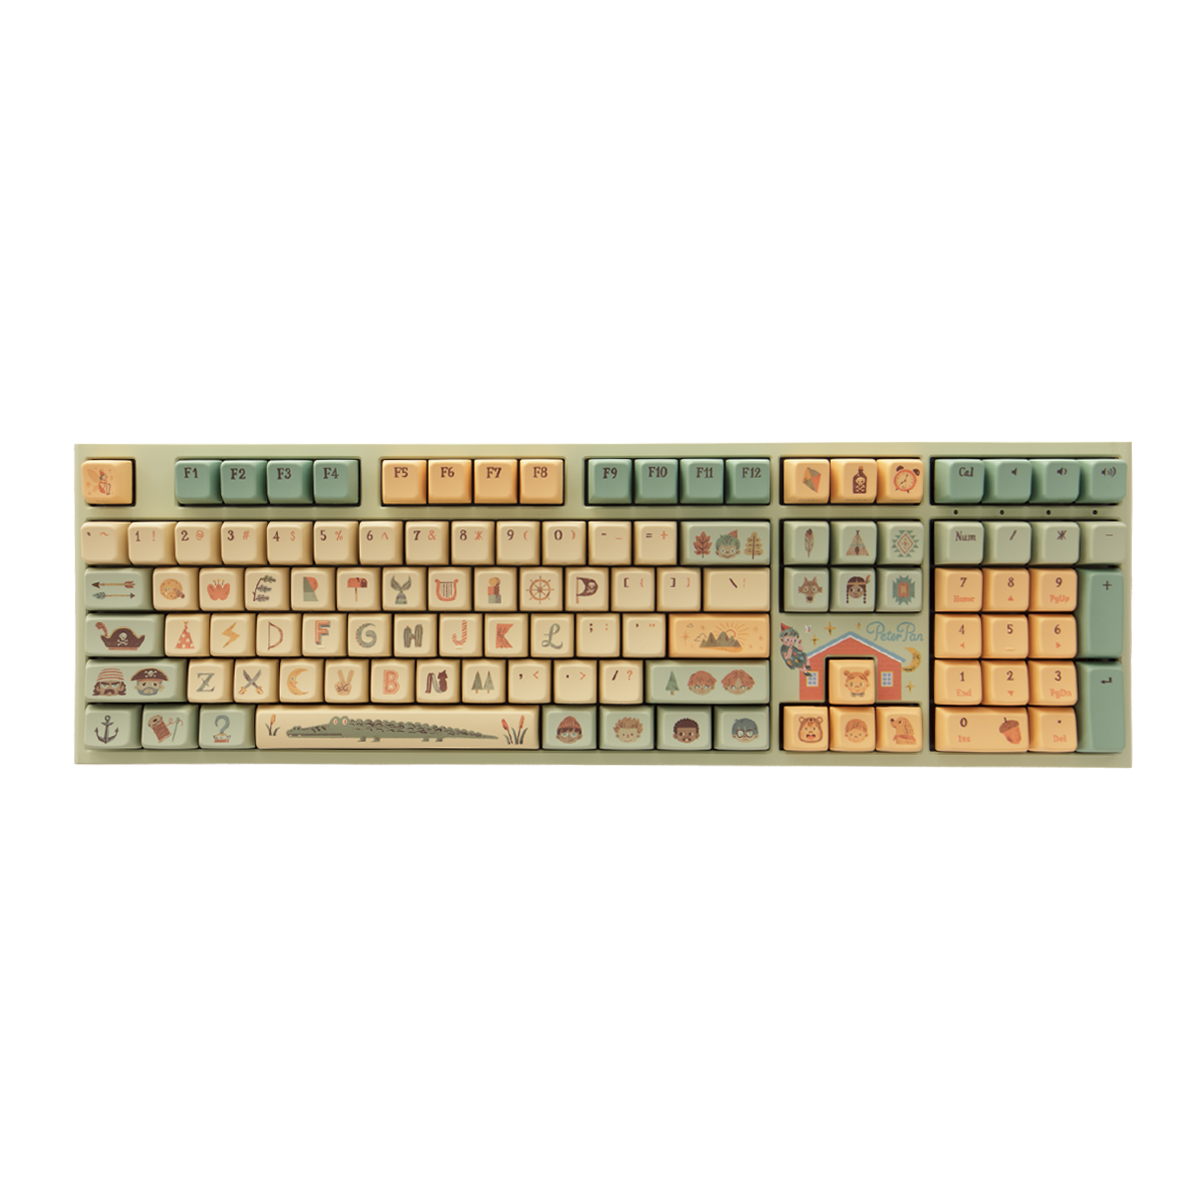 Ducky One 2 Pro Peter Pan Dimanche Collaboration Limited Edition Mechanical Gaming Keyboard - US Layout